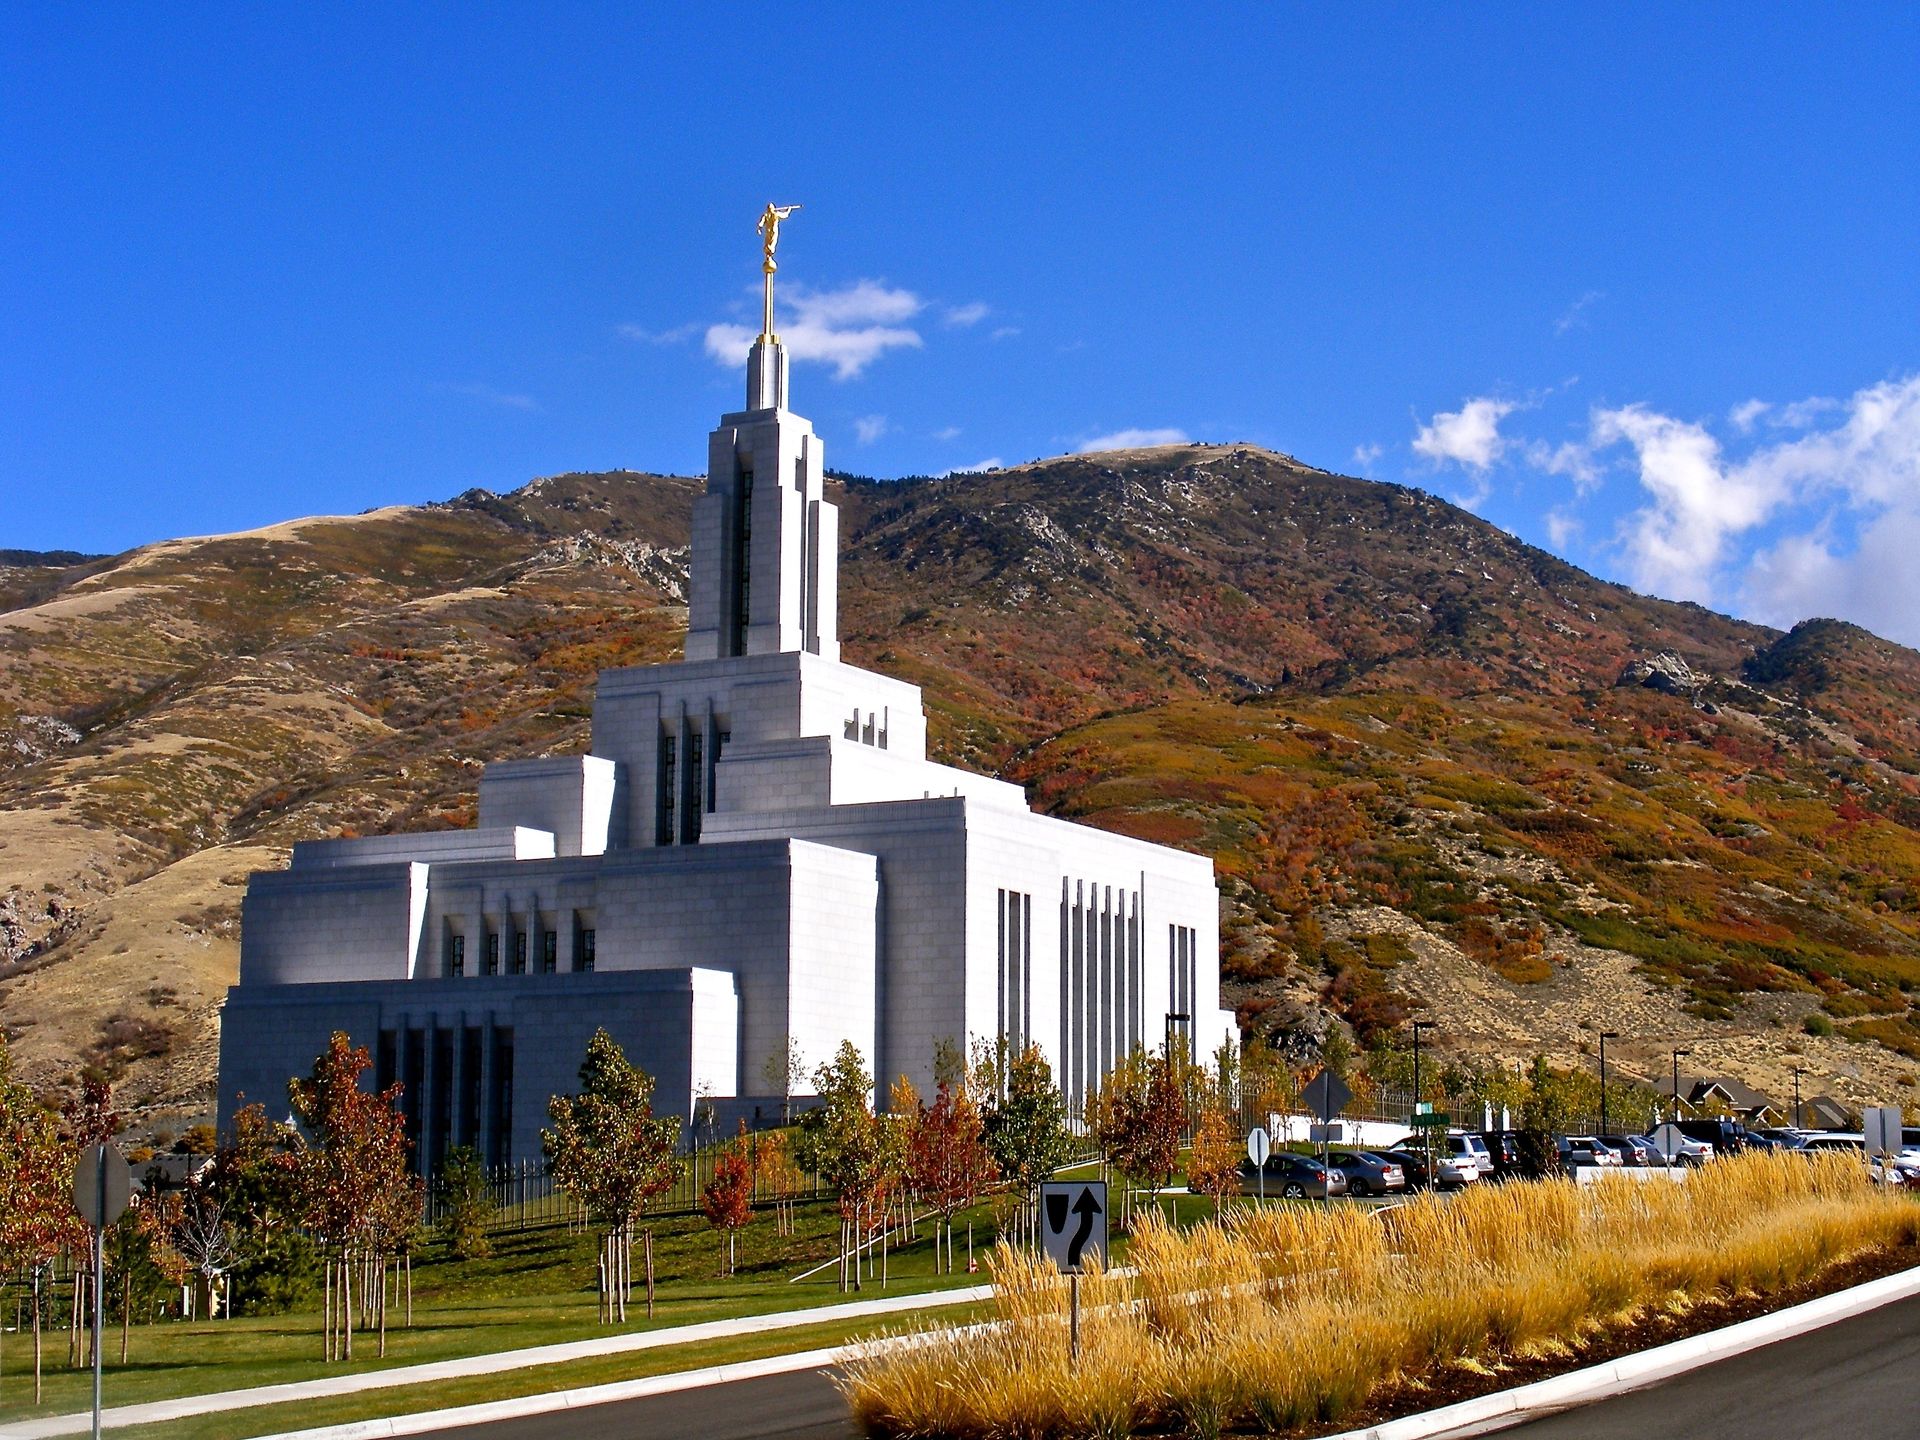 An exterior view of the Draper Utah Temple and grounds at the mouth of Corner Canyon.